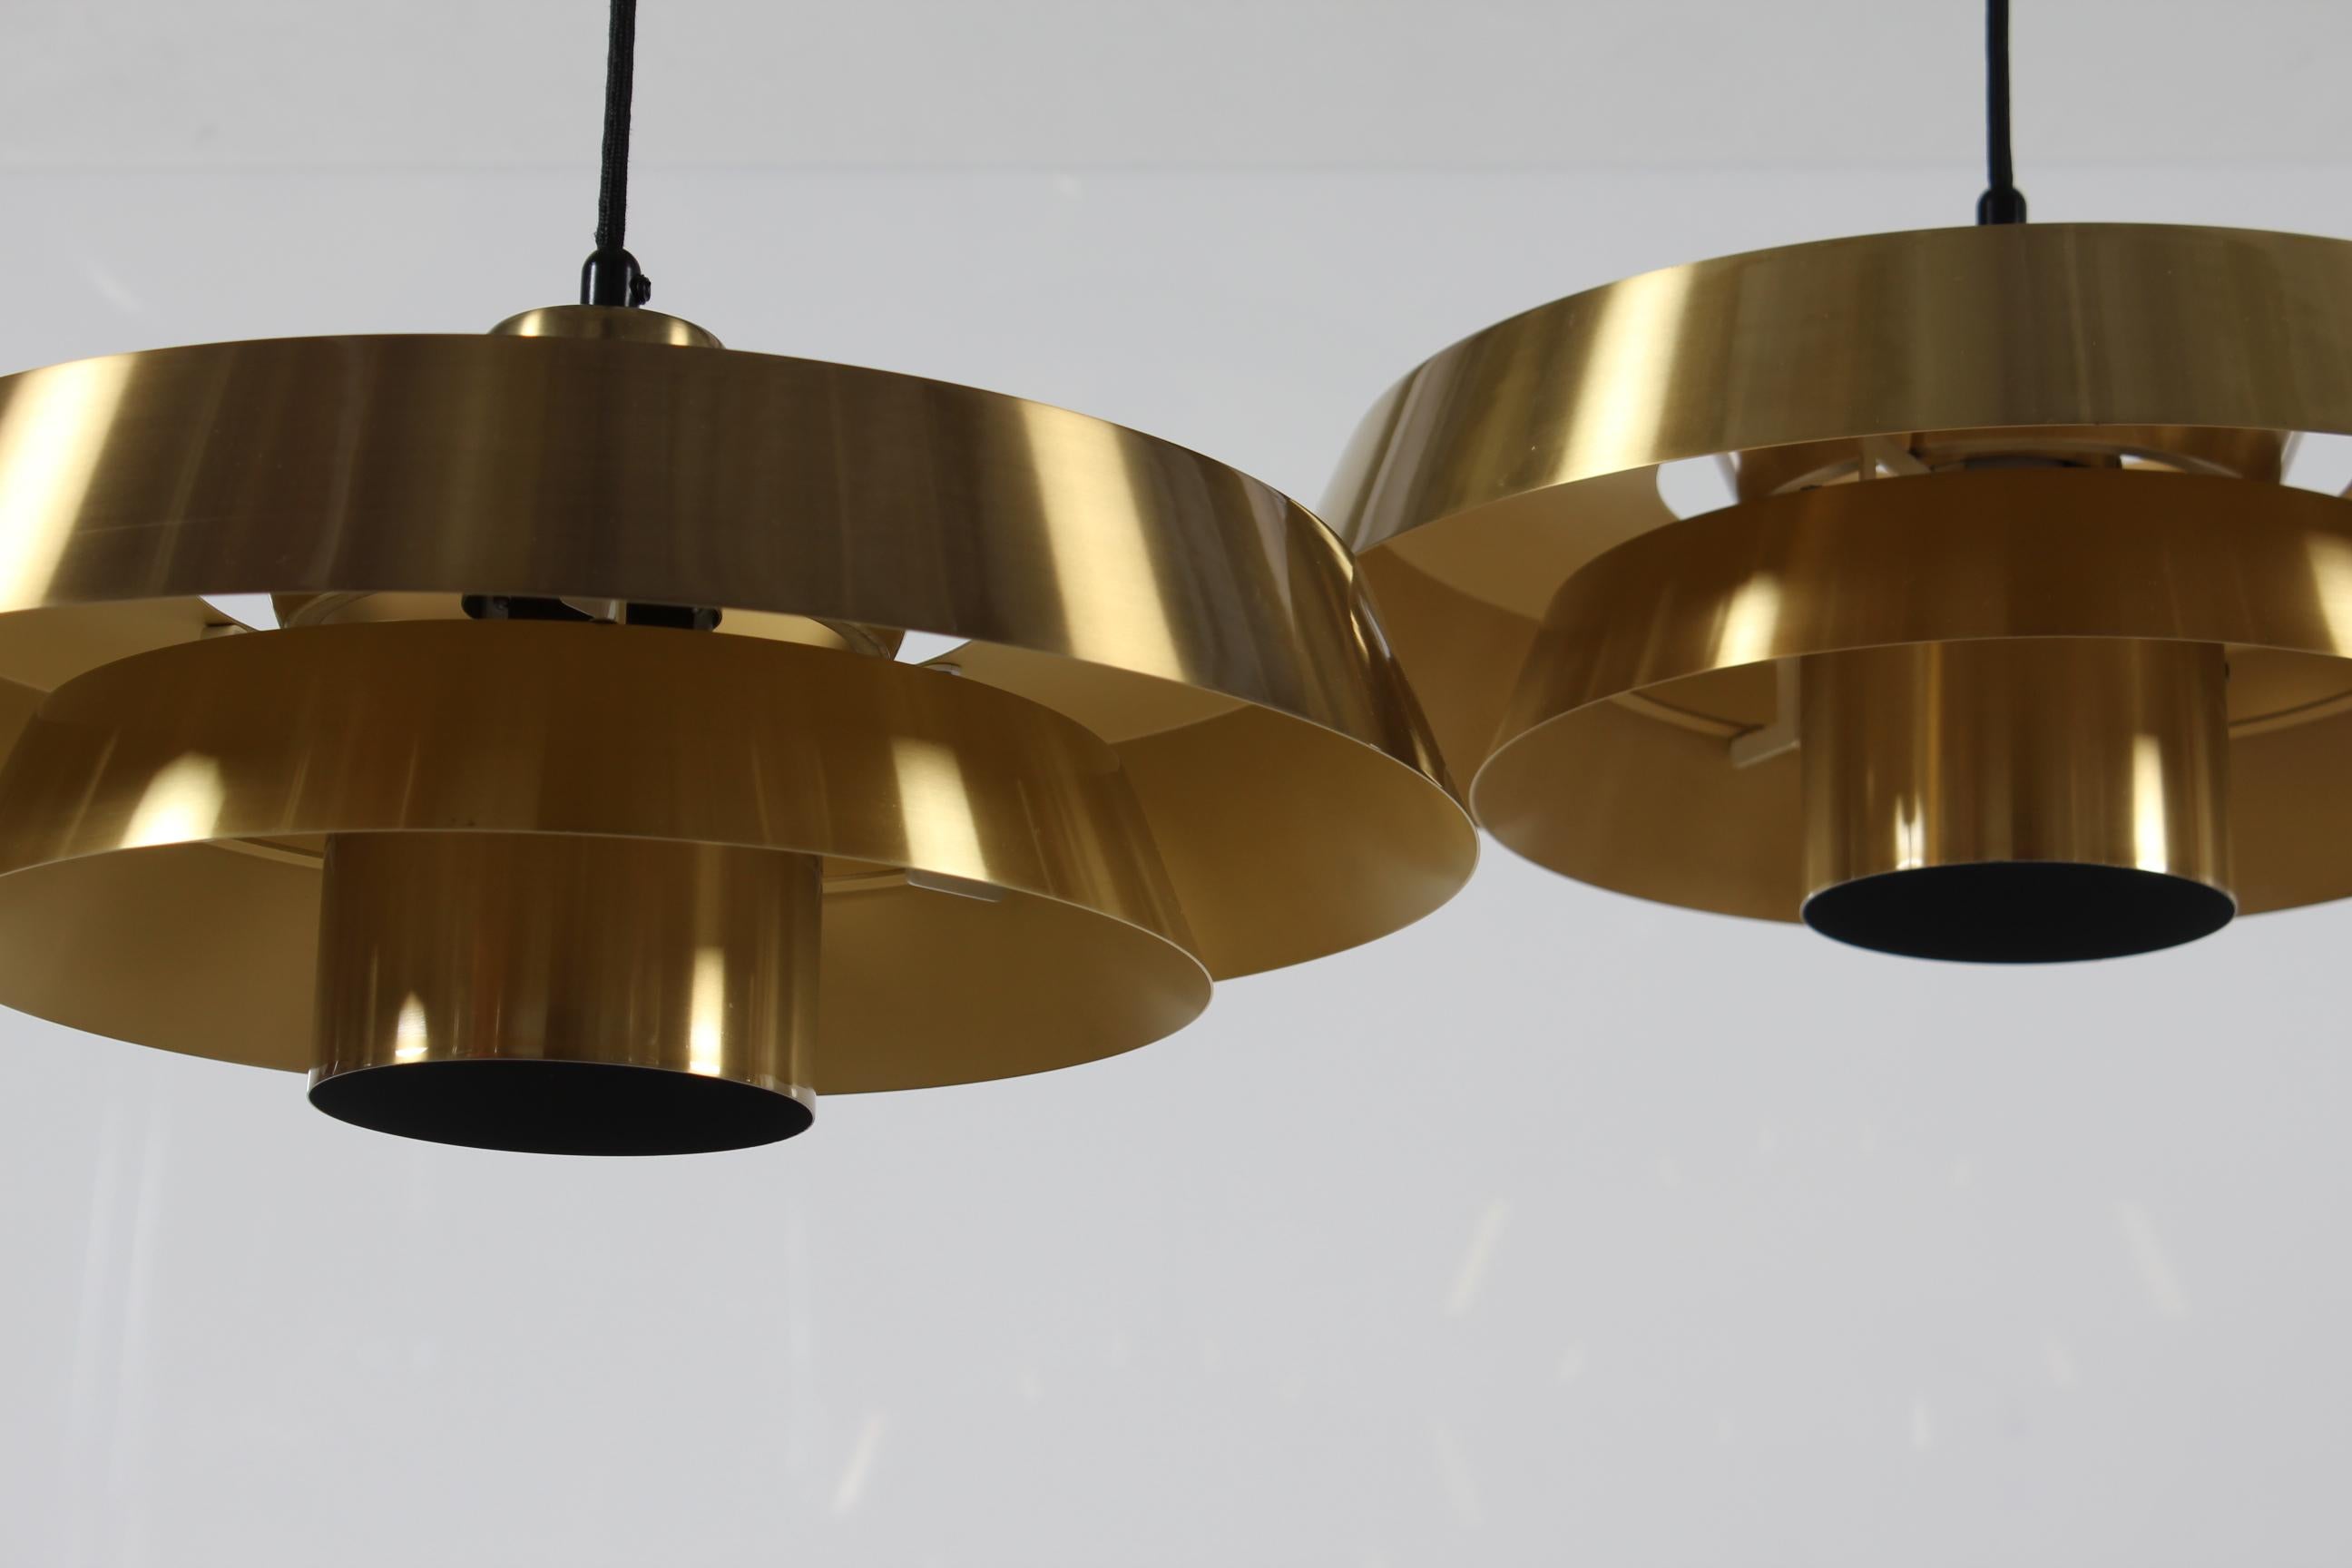 Pair of original vintage Nova ceiling pendants designed by Danish designer Jo Hammerborg in the 1960's.
They are made of brass with light warn yellow lacquer inside.
The lamps are made by the Danish lamp manufacturer Fog & Mørup in Copenhagen in